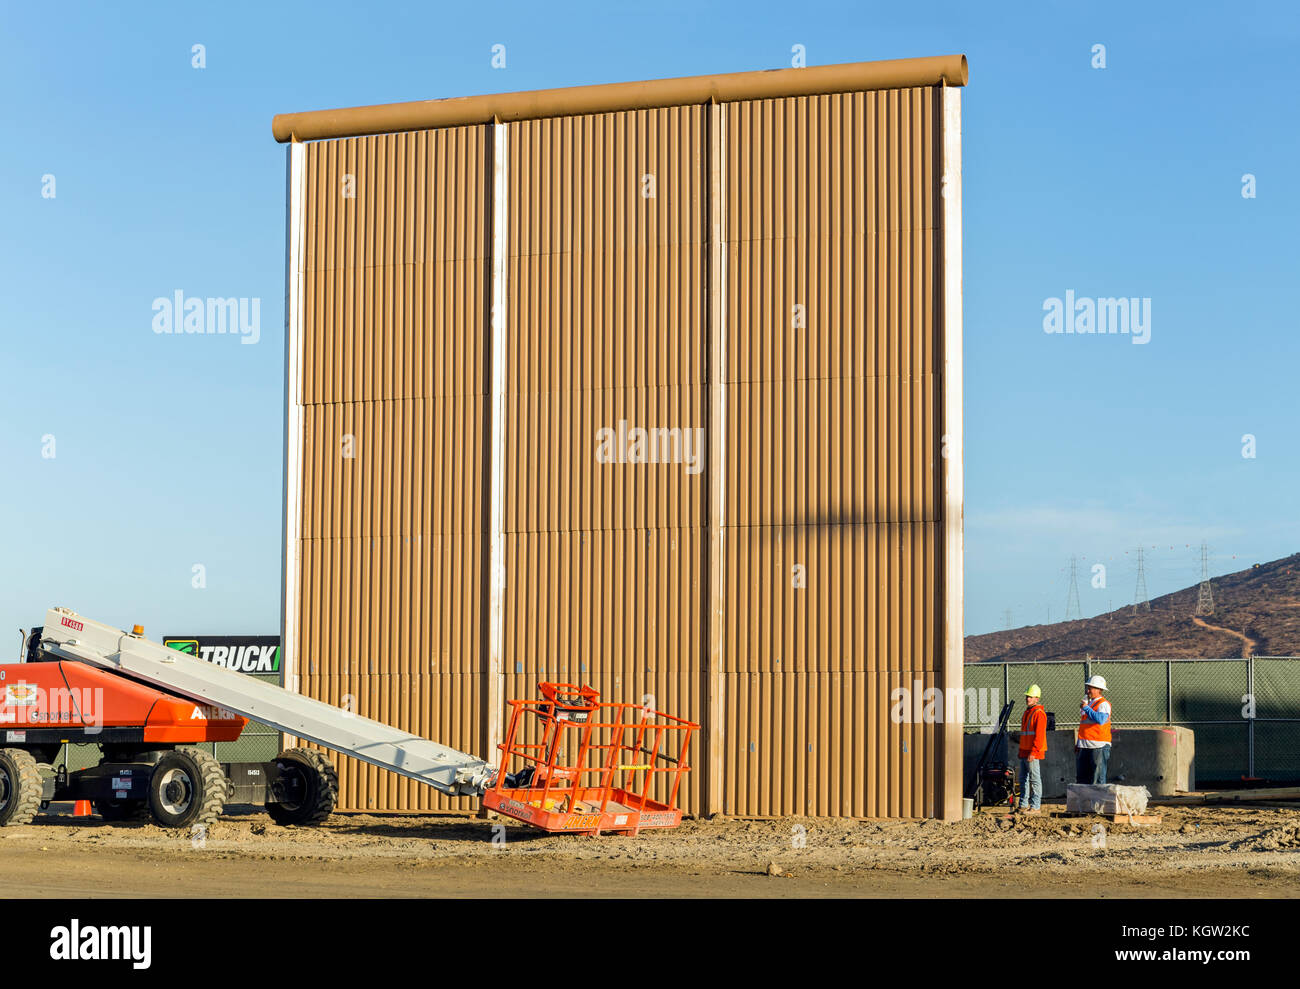 Trump administration new US-Mexico border wall prototypes are unveiled in October 2017. This prototype is one of 2 designed and built by W.G. Yates & Sons, a company based in Philadelphia, and will be subjected to testing to ensure they can withstand attack and attempts to go through, under and over them. See more information below. Stock Photo